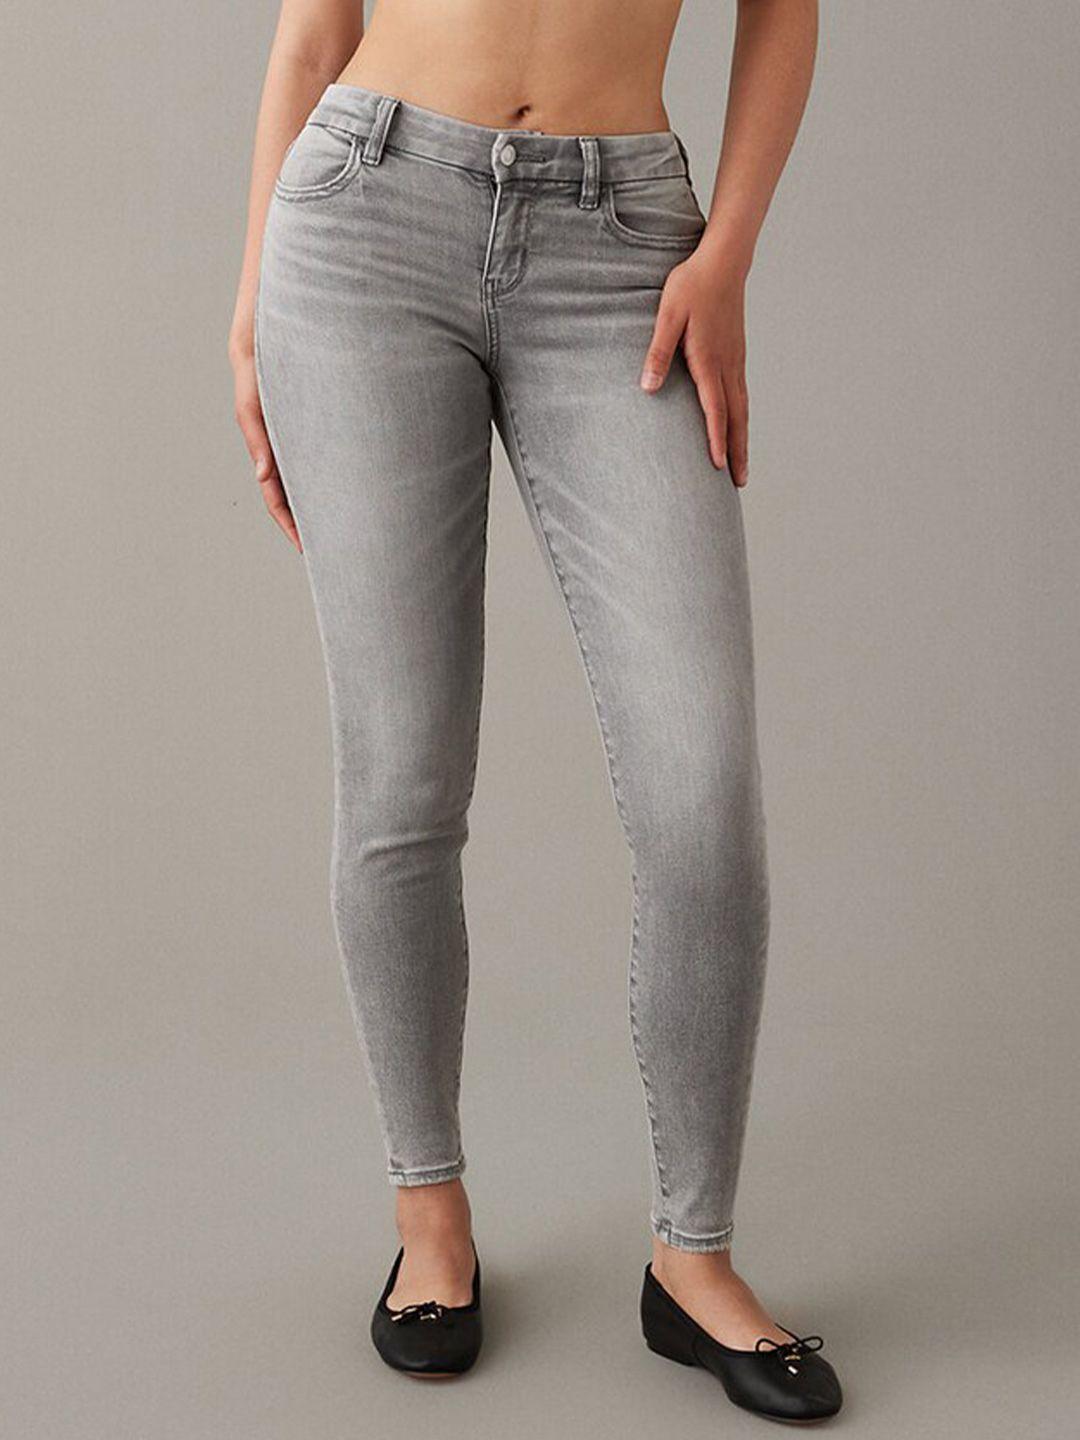 american-eagle-outfitters-women-ne(x)t-level-low-rise-curvy-denim-jegging